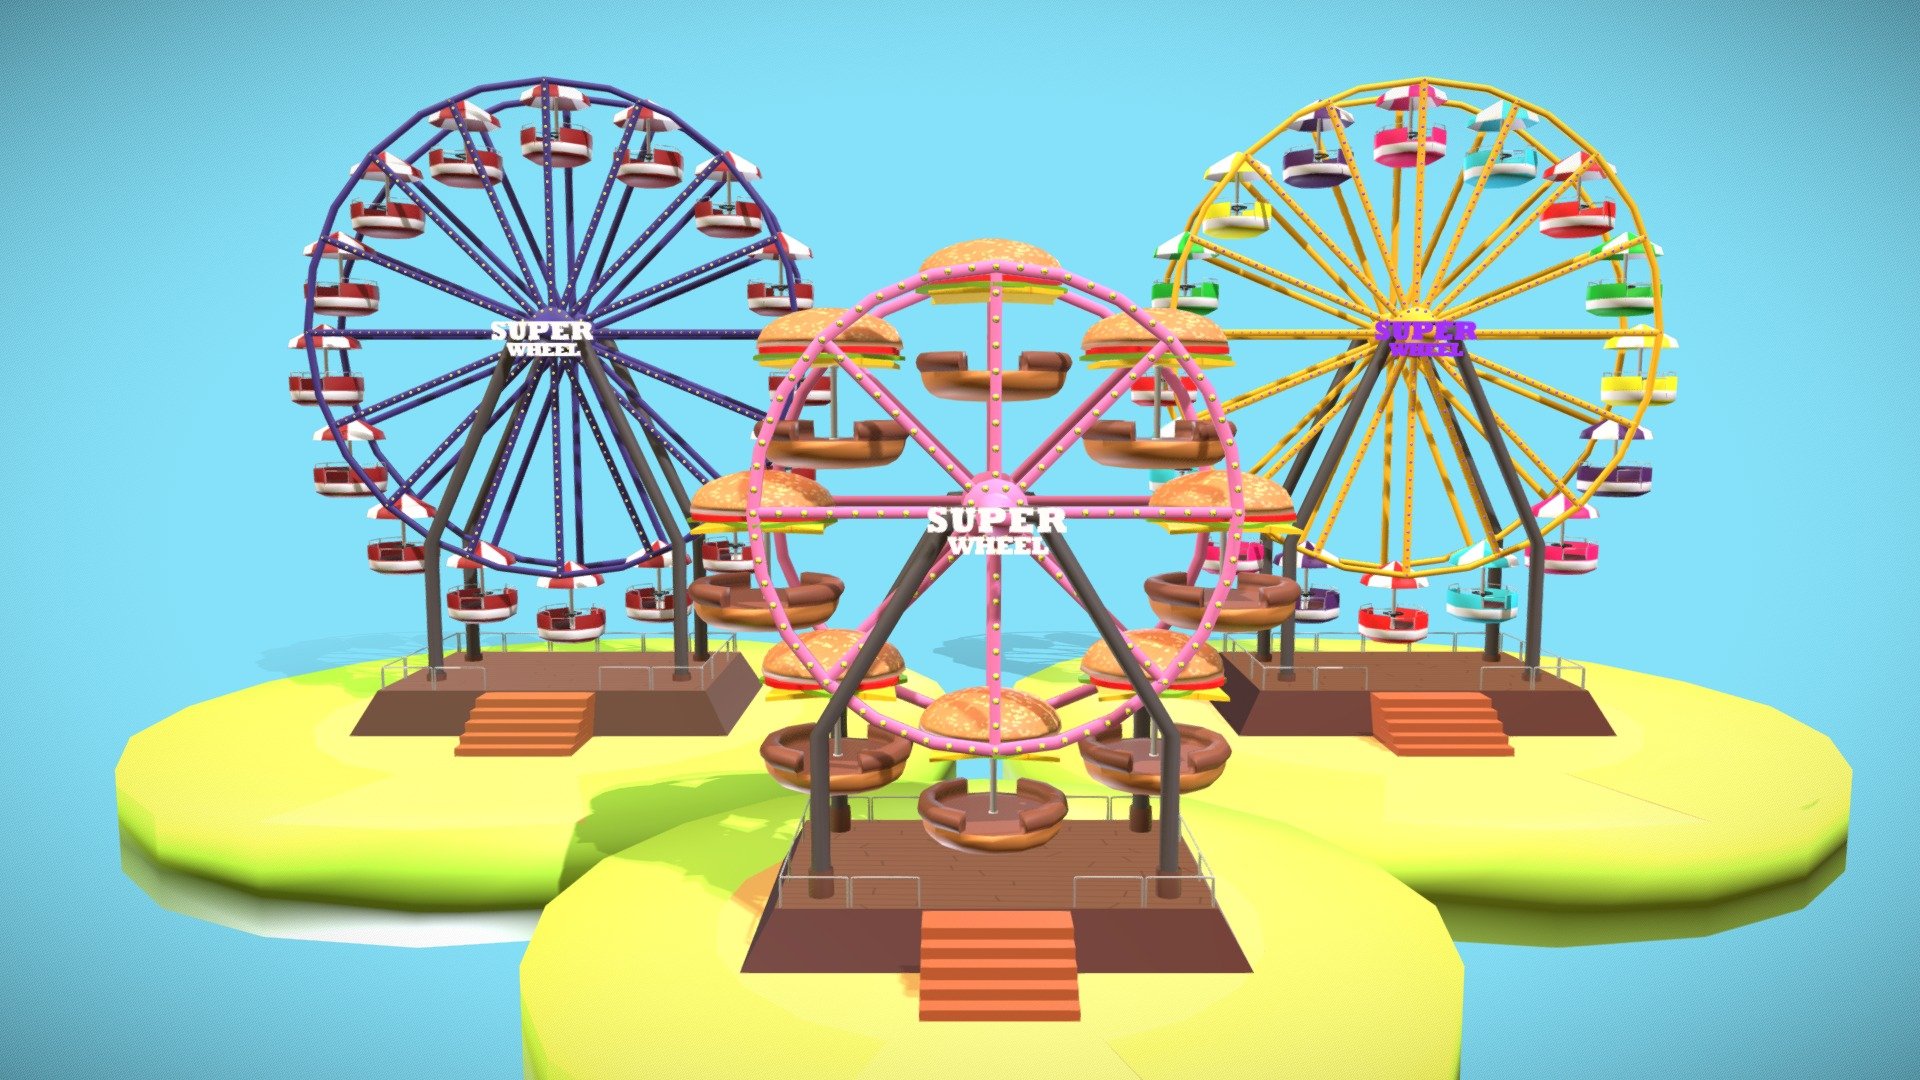 This is a Ferris wheel pack, is medium/low quality 3D model. That will enhance detail to any of your rendering projects. The model has a fully textured and detailed design that allows for close-up renders, and was originally modeled,texturized in Autodesk Maya 2018 and rendered with Arnold. The model have Uvs done and it contains all the textures. It very cute model it has colourful cabins(red,blue, yellow purple, green and pink).Also have hamburguers cabins, colorful ligths&hellip;

This model can be used for any type of work as: low poly or high poly project, videogame, render, video, animation, film…This is perfect to use like a part of a amusement park scene or for a postcard image with other decoration such as the carousel that you could see in my profile too…

This contains a .fbx and textures.

I hope you like it, if you have any doubt or any question about it contact me without any problem! I will help you as soon as possible, if you like it I will aprecciate if you could give your personal review! Thanks - Ferris Wheel Pack - Buy Royalty Free 3D model by Ainaritxu14 3d model